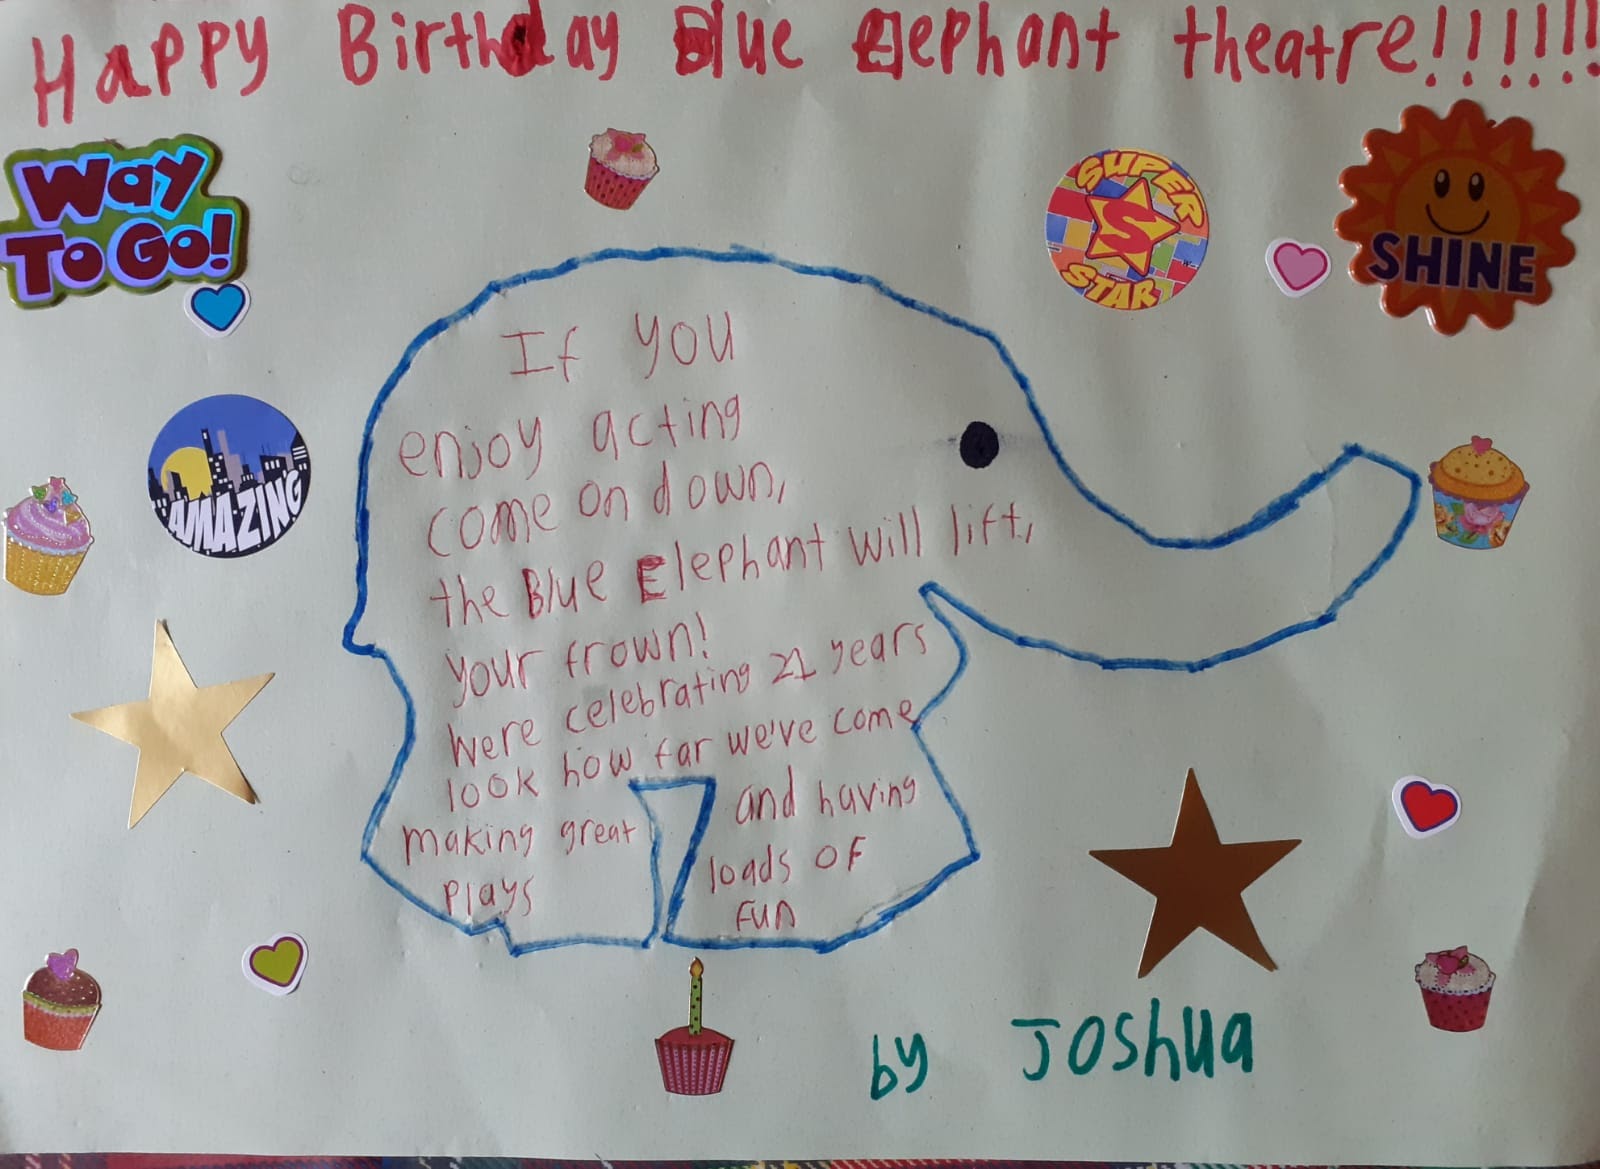 Entry reading Happy Birthday Blue Elephant Theatre!!! Beneath is an outline of en elephant, with a poem inside: If you enjoy acting come on down, The Blue Elephant will lift your frown! We're celebrating 21 years, look how far we've come, making great plays and having loads of fun